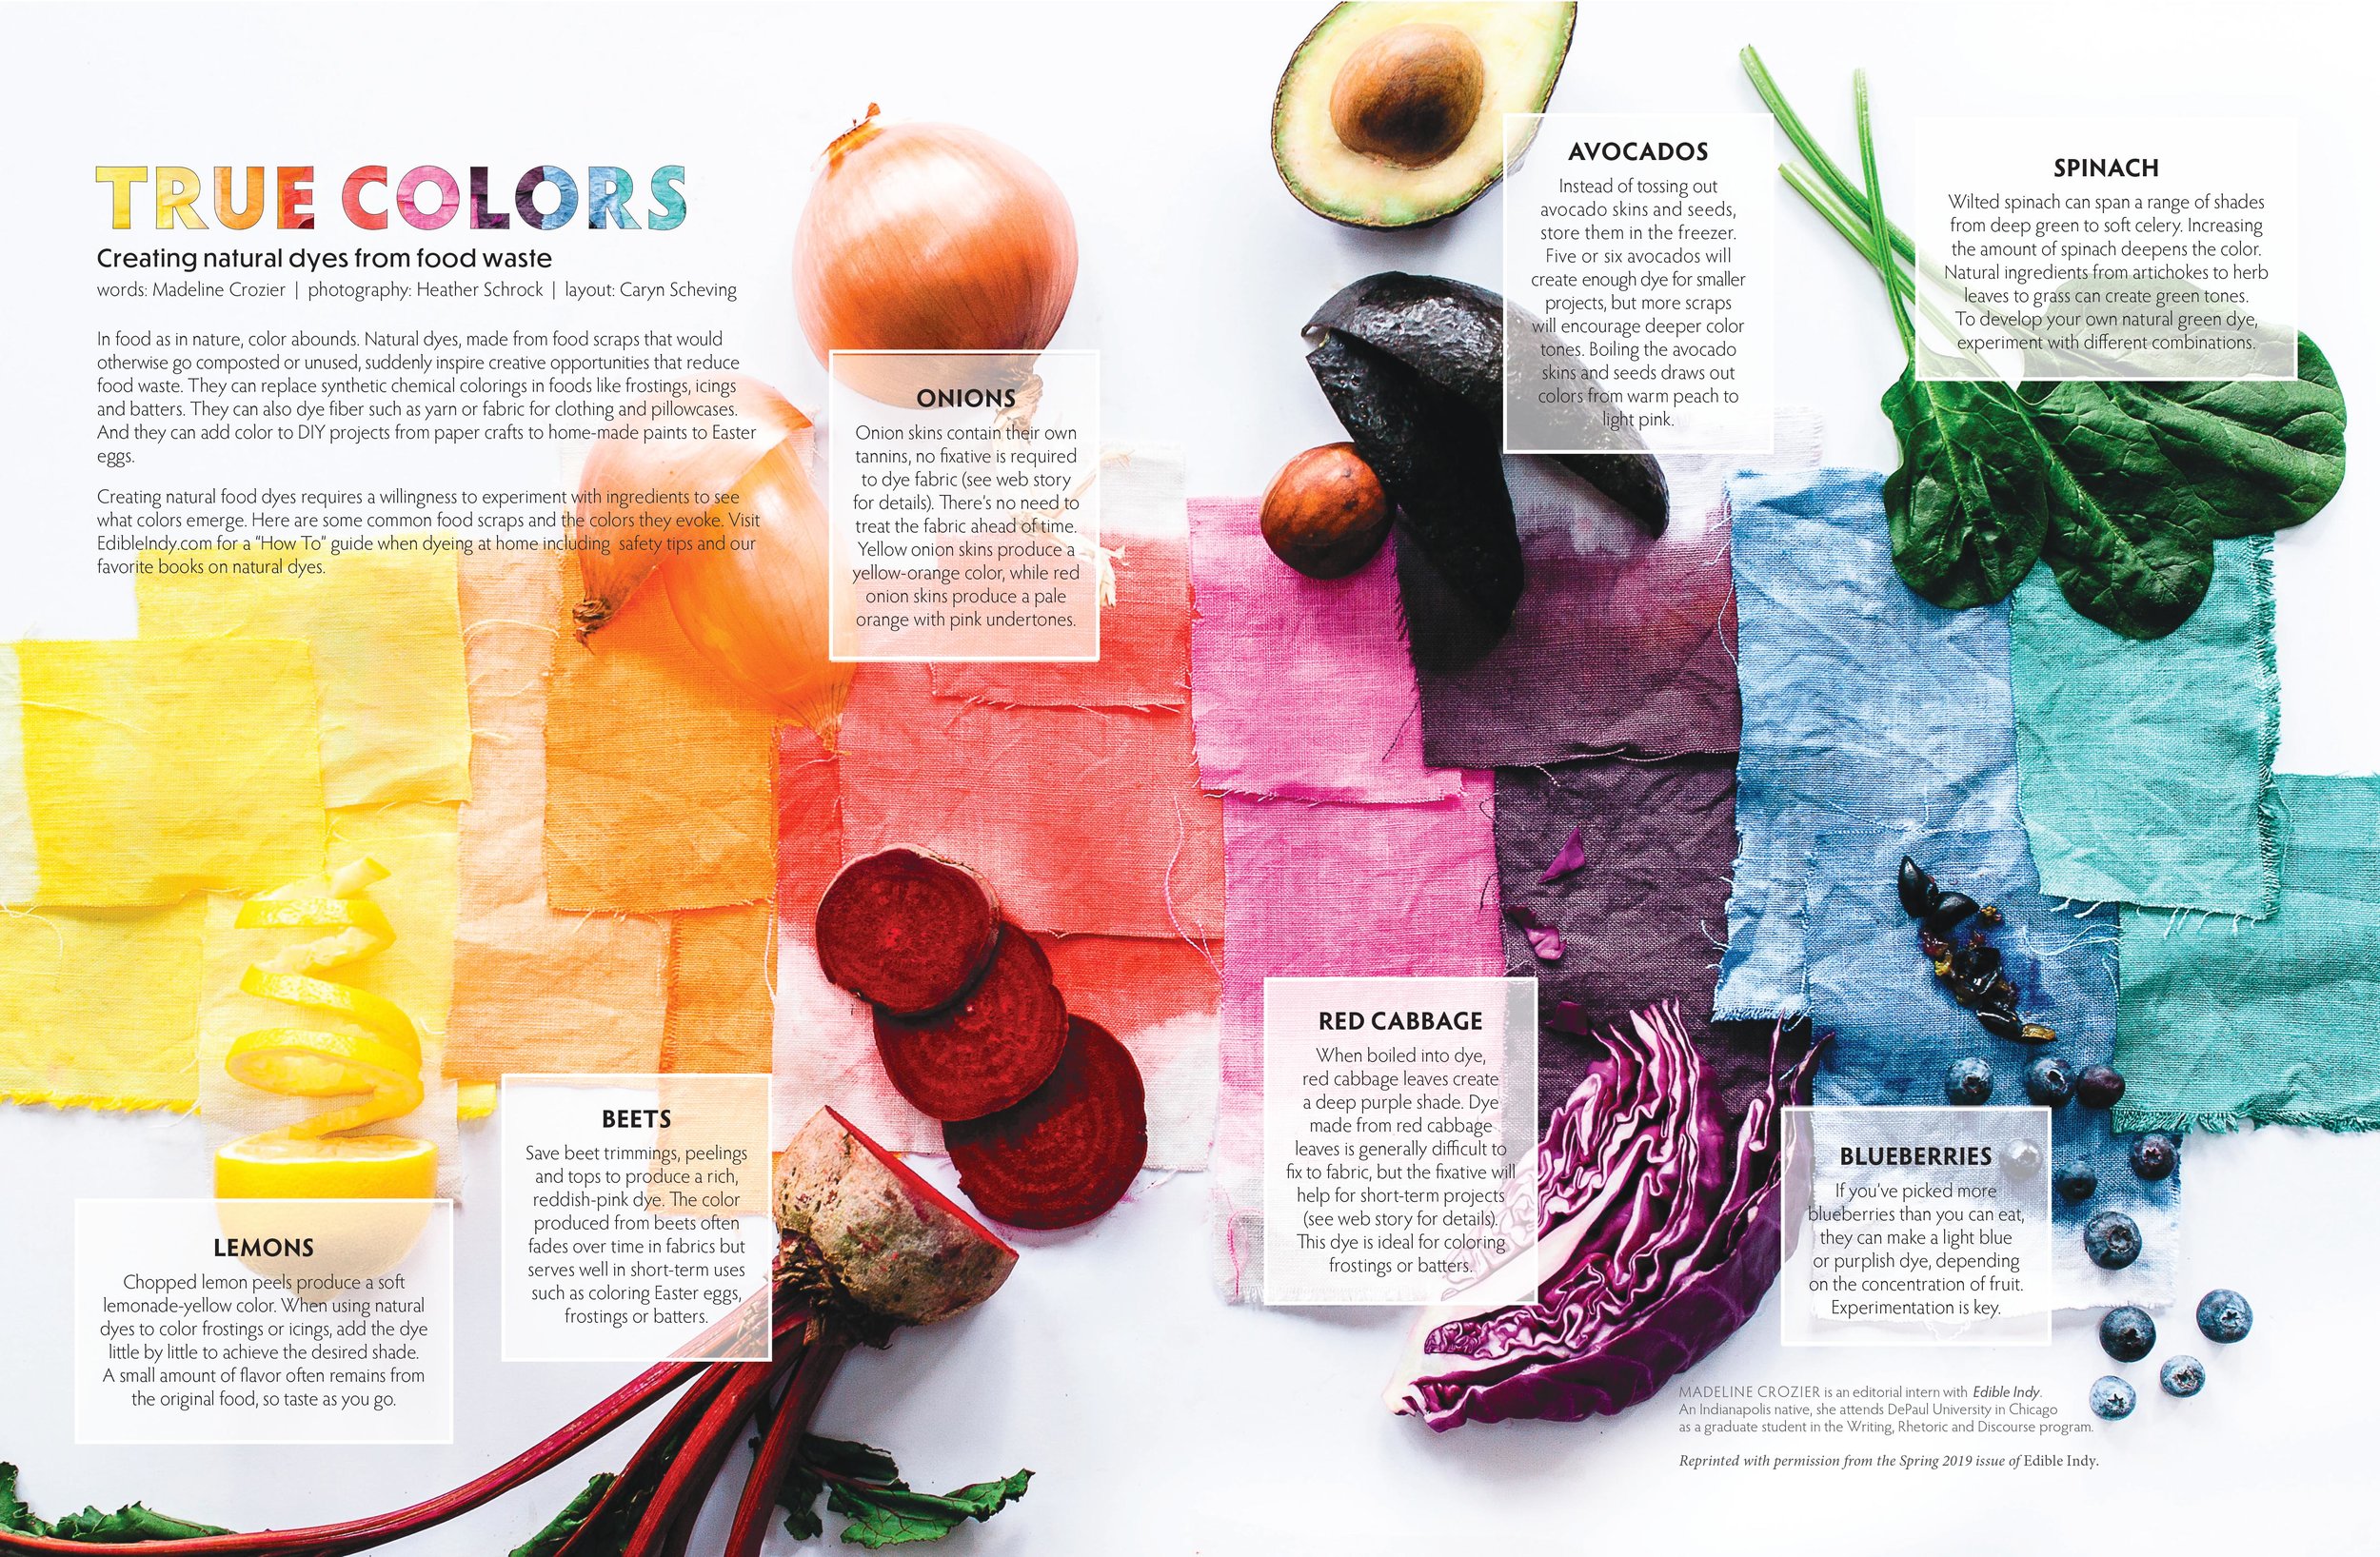 Here's How You Can Use a Natural Substitute for Food Coloring